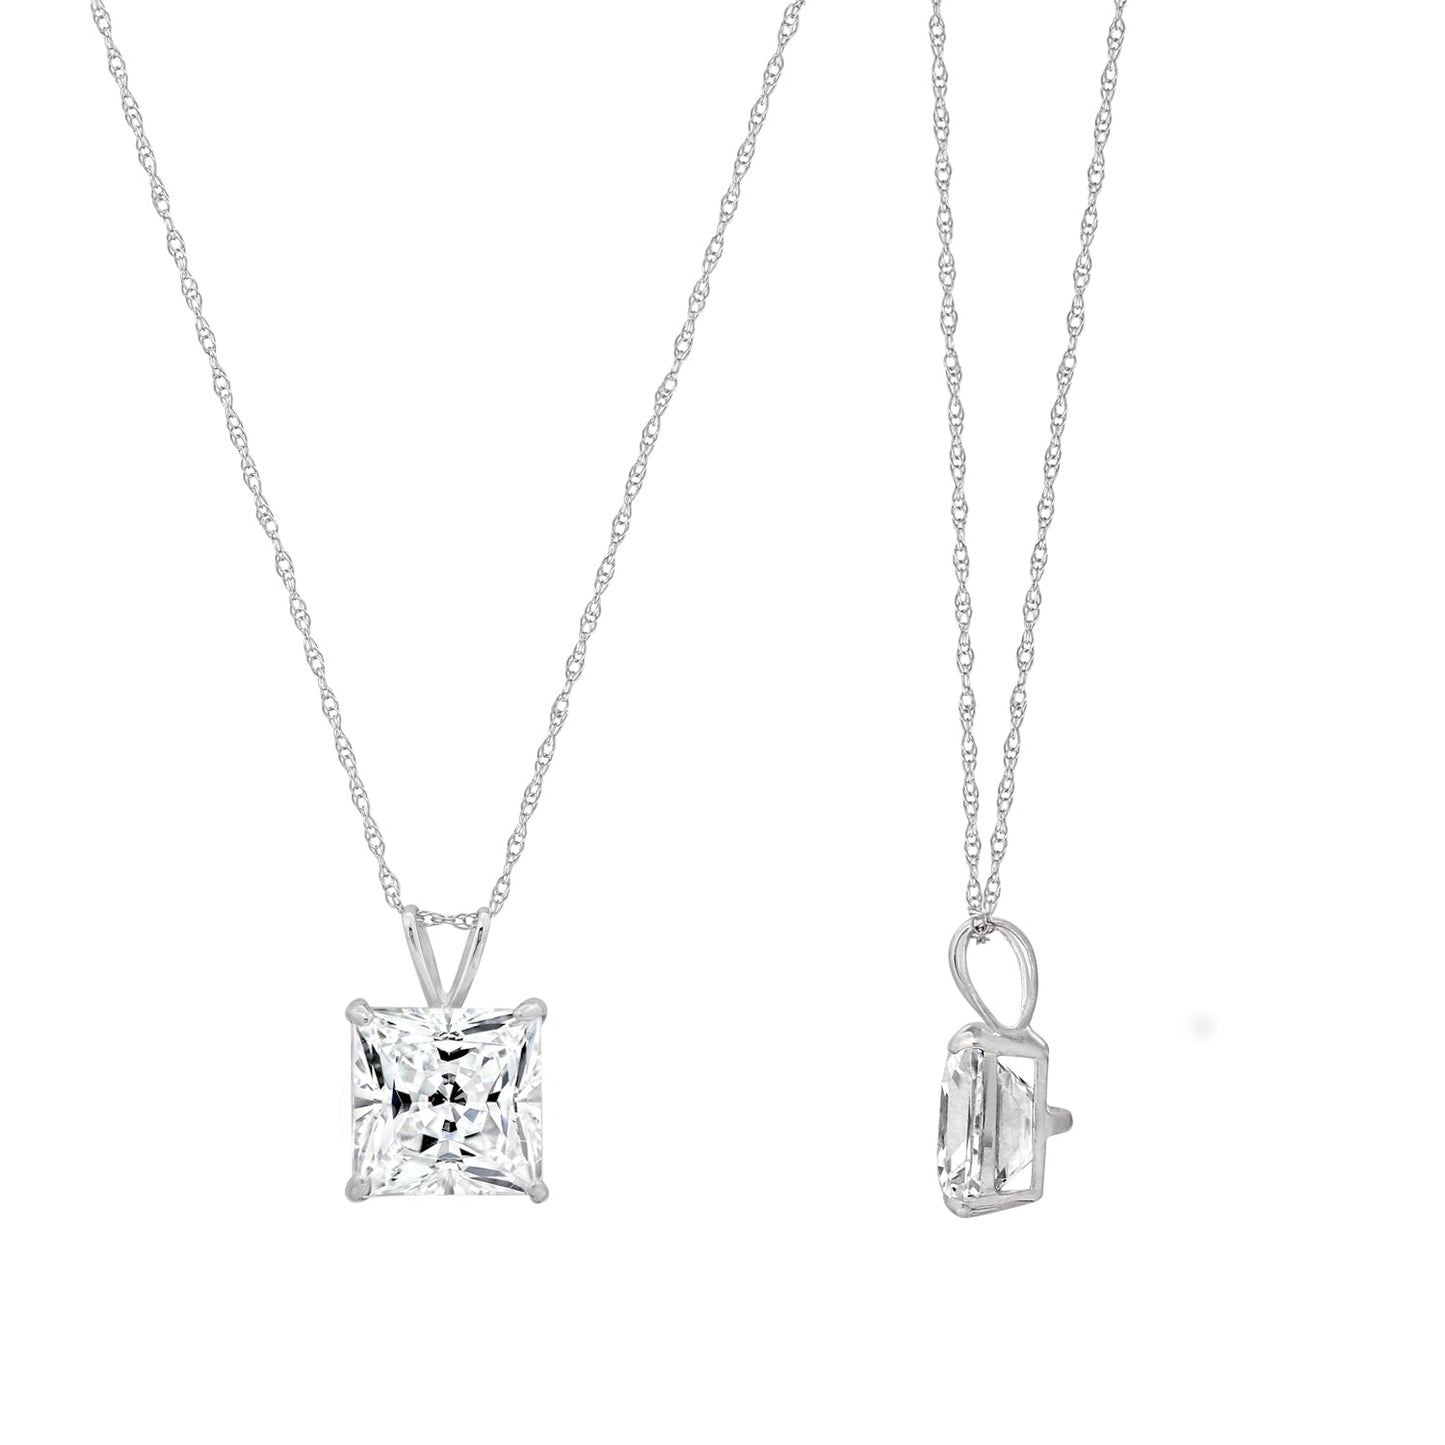 2 Cttw Princess Pendant with Chain